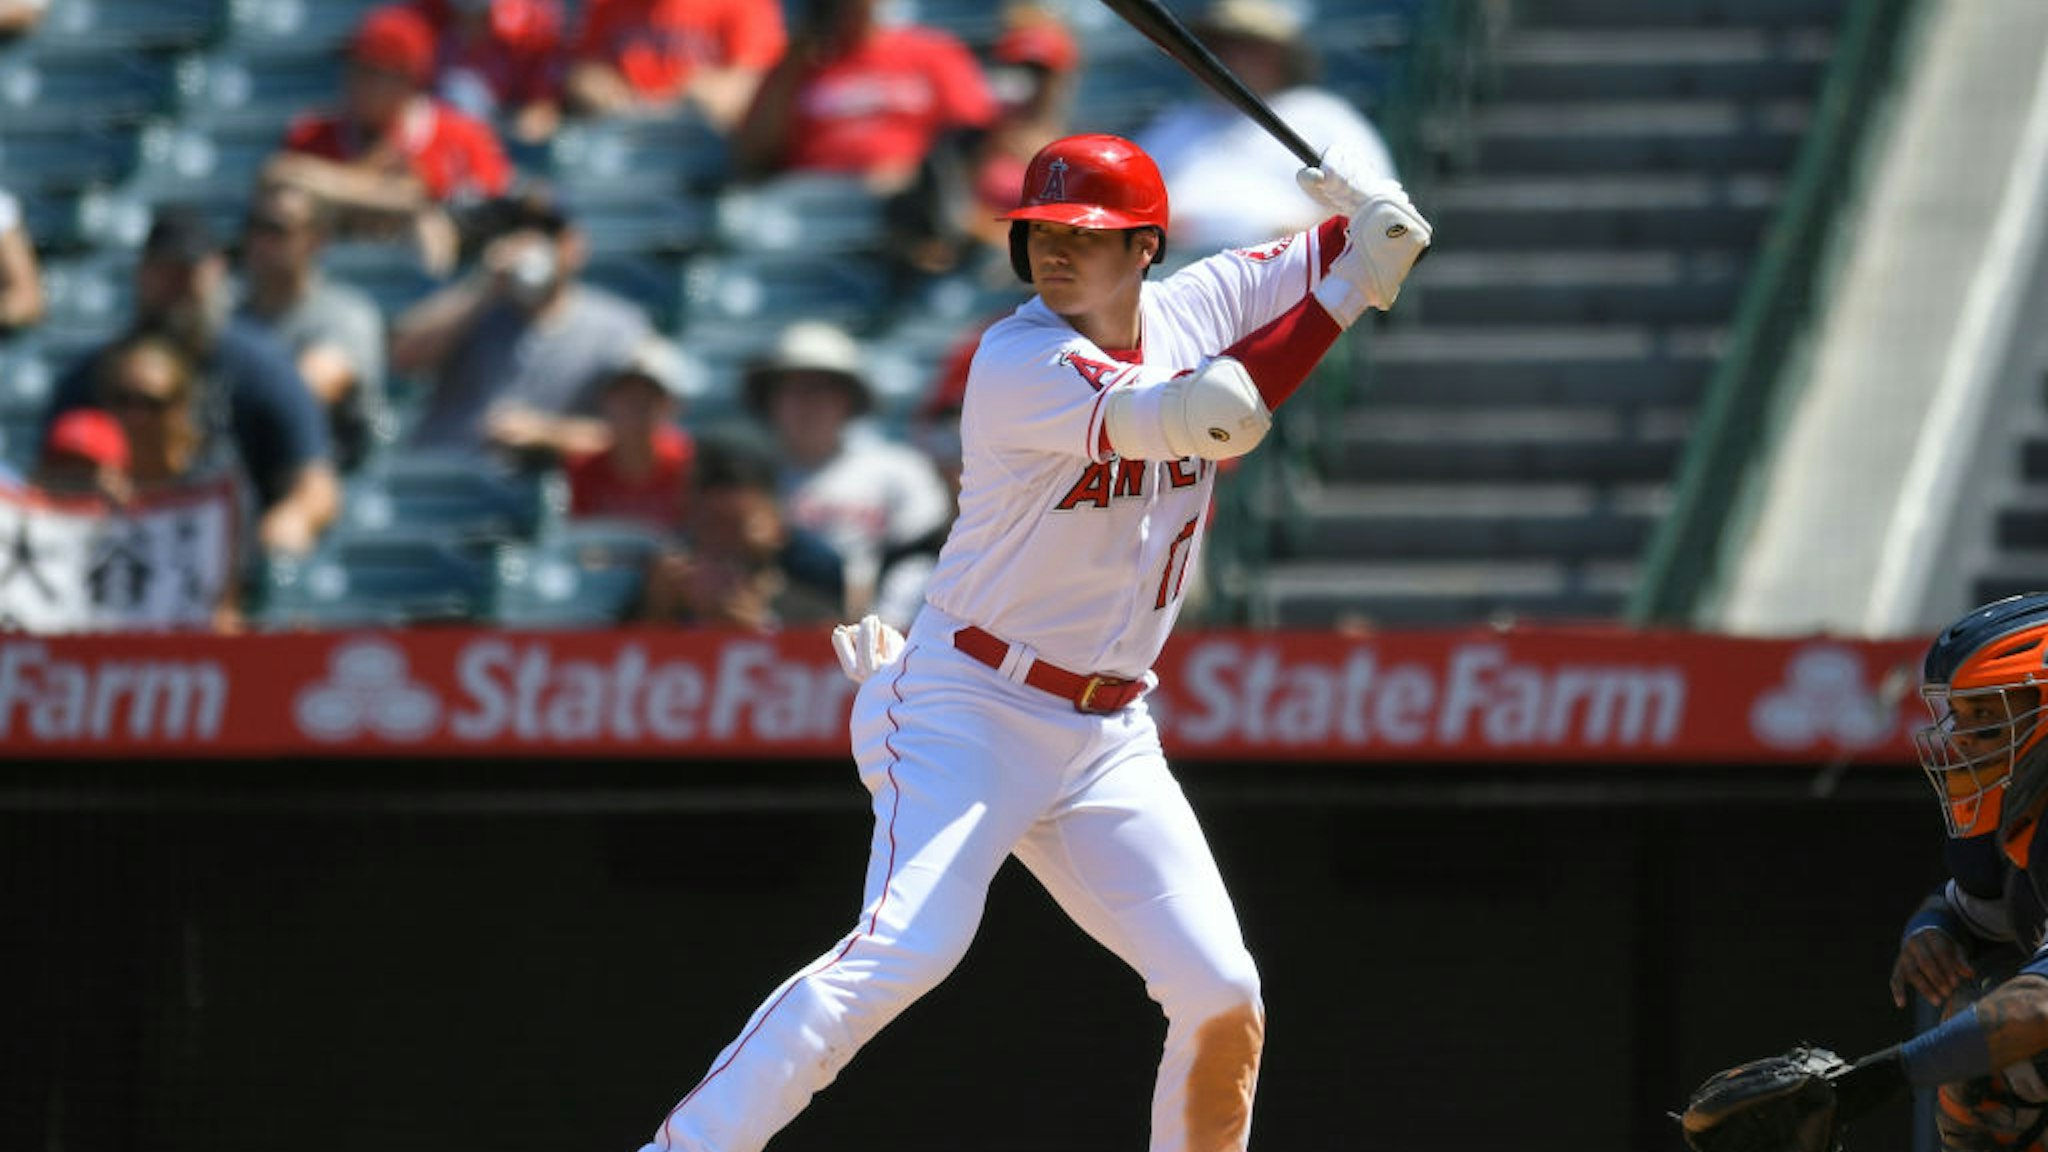 ANAHEIM, CALIFORNIA - AUGUST 15: Shohei Ohtani #17 of the Los Angeles Angels at bat while playing the Houston Astros at Angel Stadium of Anaheim on August 15, 2021 in Anaheim, CALIFORNIAlifornia. (Photo by John McCoy/Getty Images)